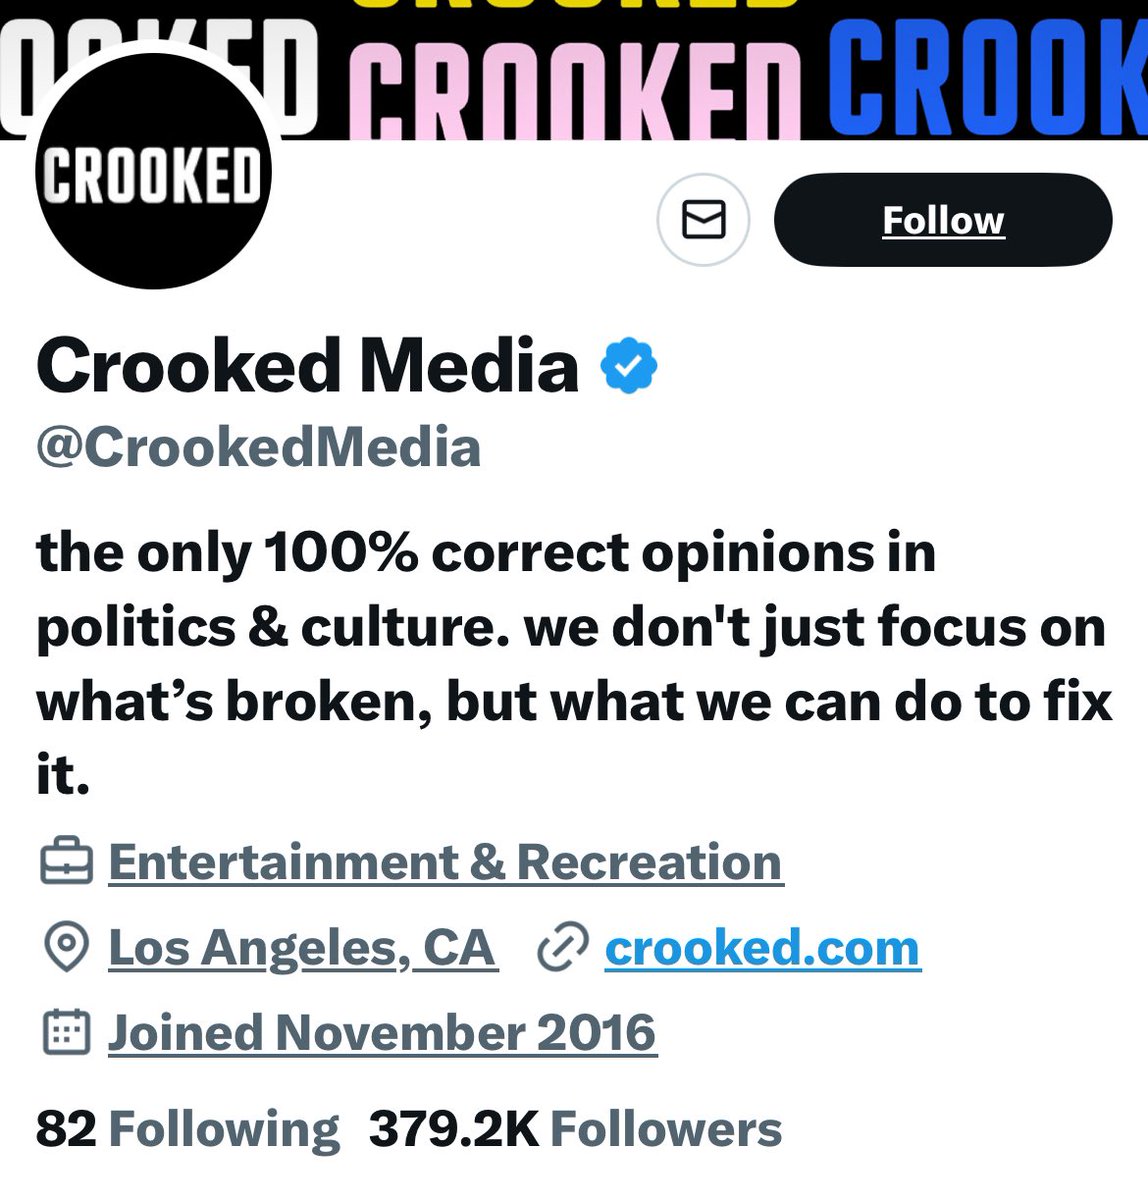 I’m going to argue @crookedmedia that your choice to choose money over reputation and promote a supplement that encourages binge drinking means that you are not 100% interested in fixing what is broken